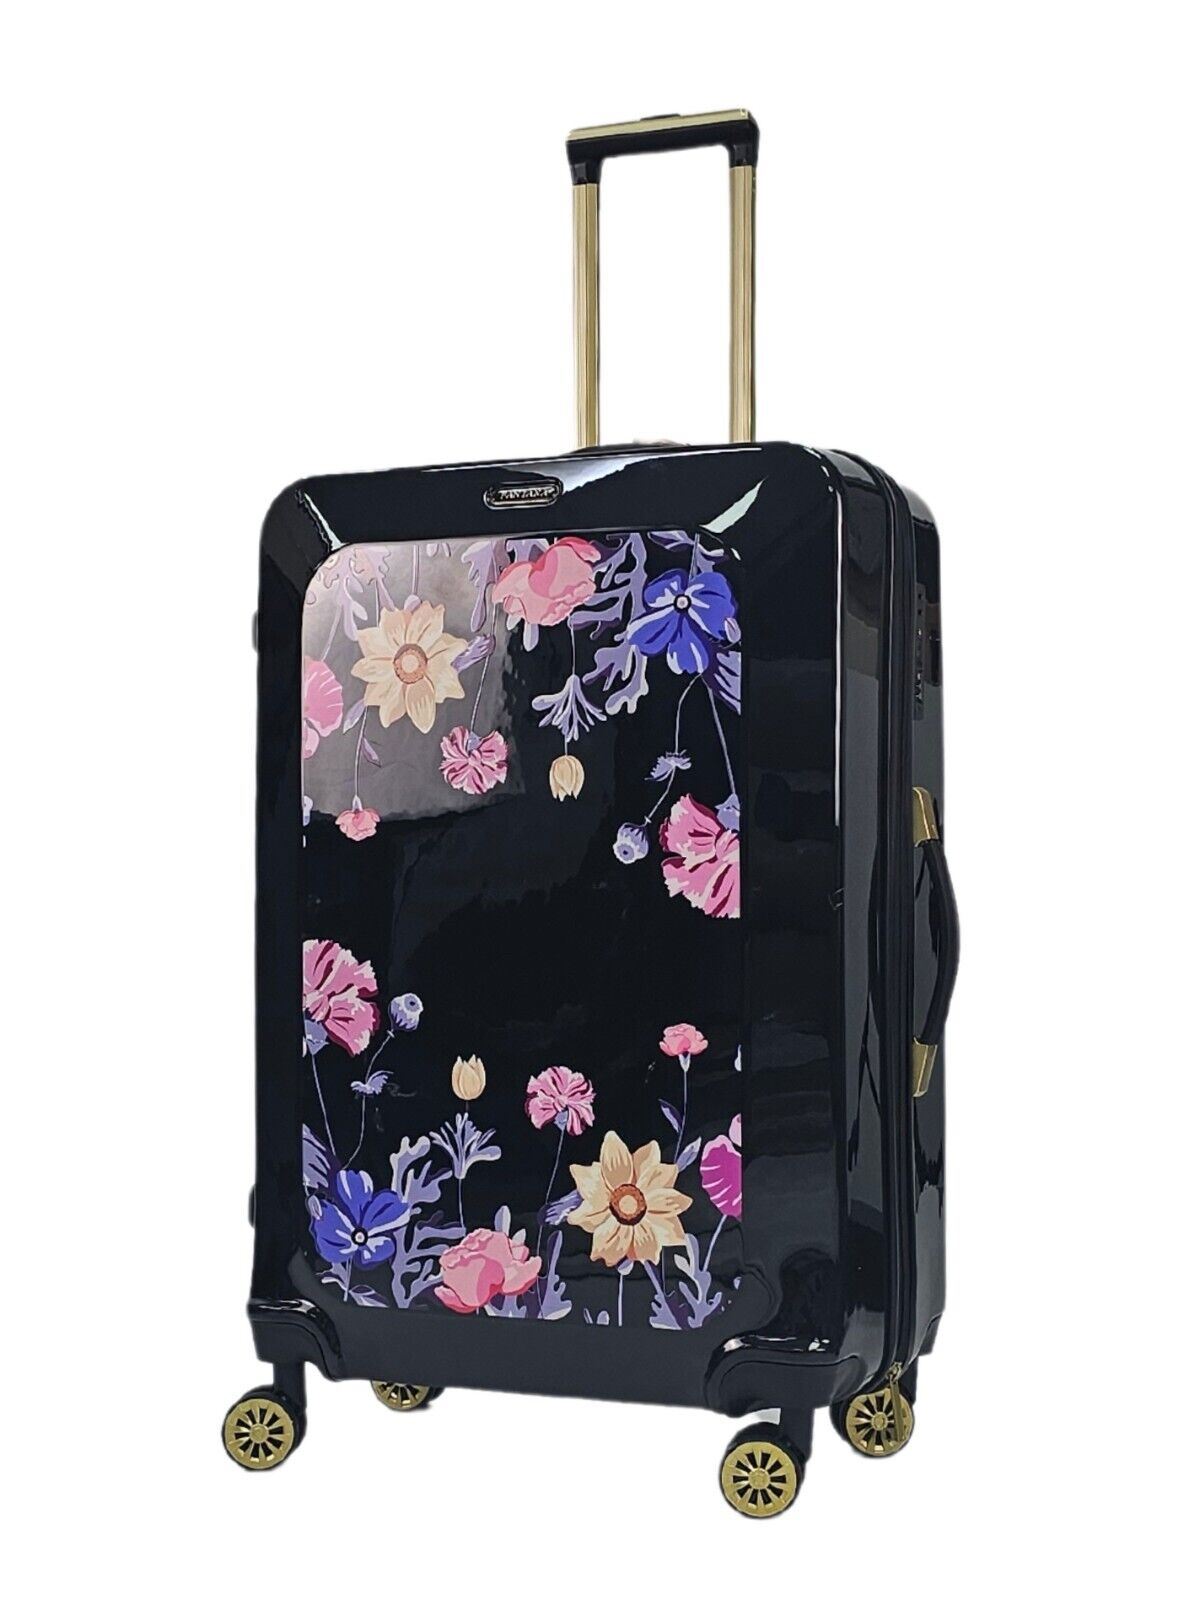 Butler Large Hard Shell Suitcase in Black